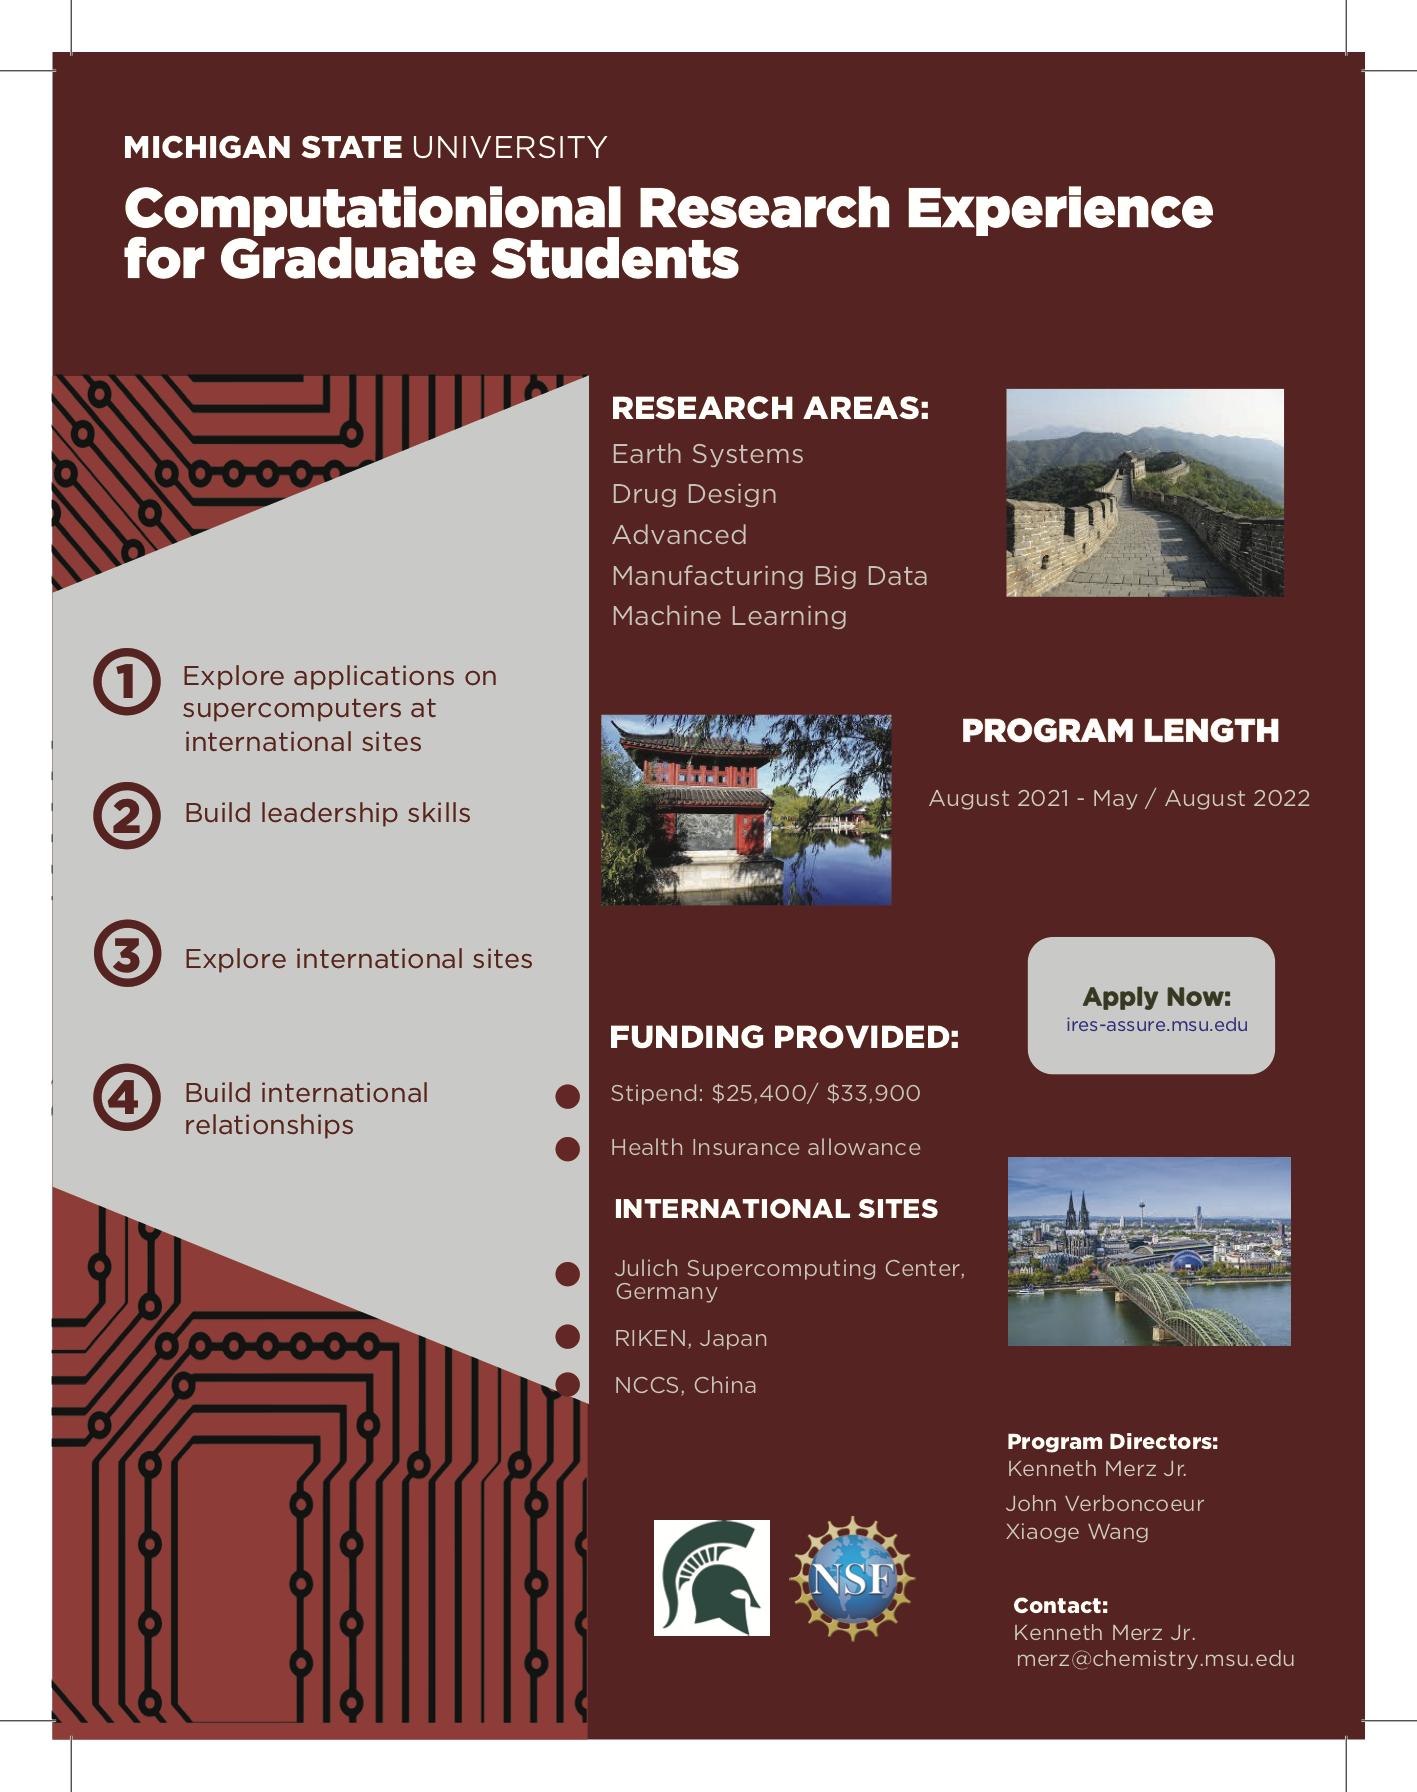 Computational research experiences for graduate students